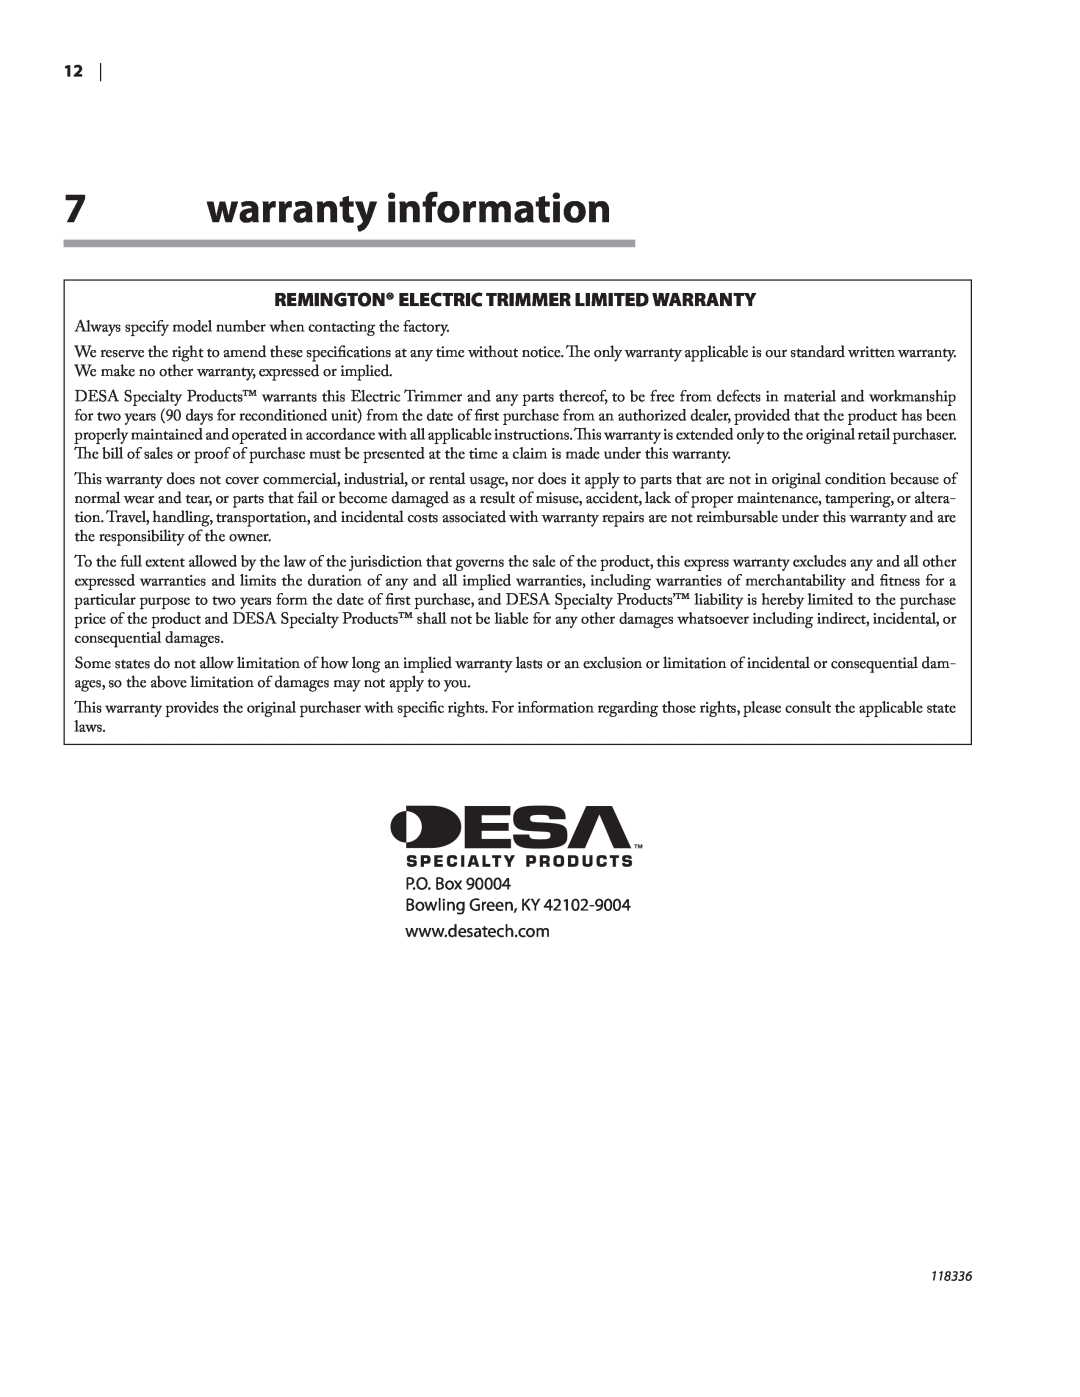 Remington Power Tools ST3010A owner manual warranty information, Remington Electric Trimmer Limited Warranty 